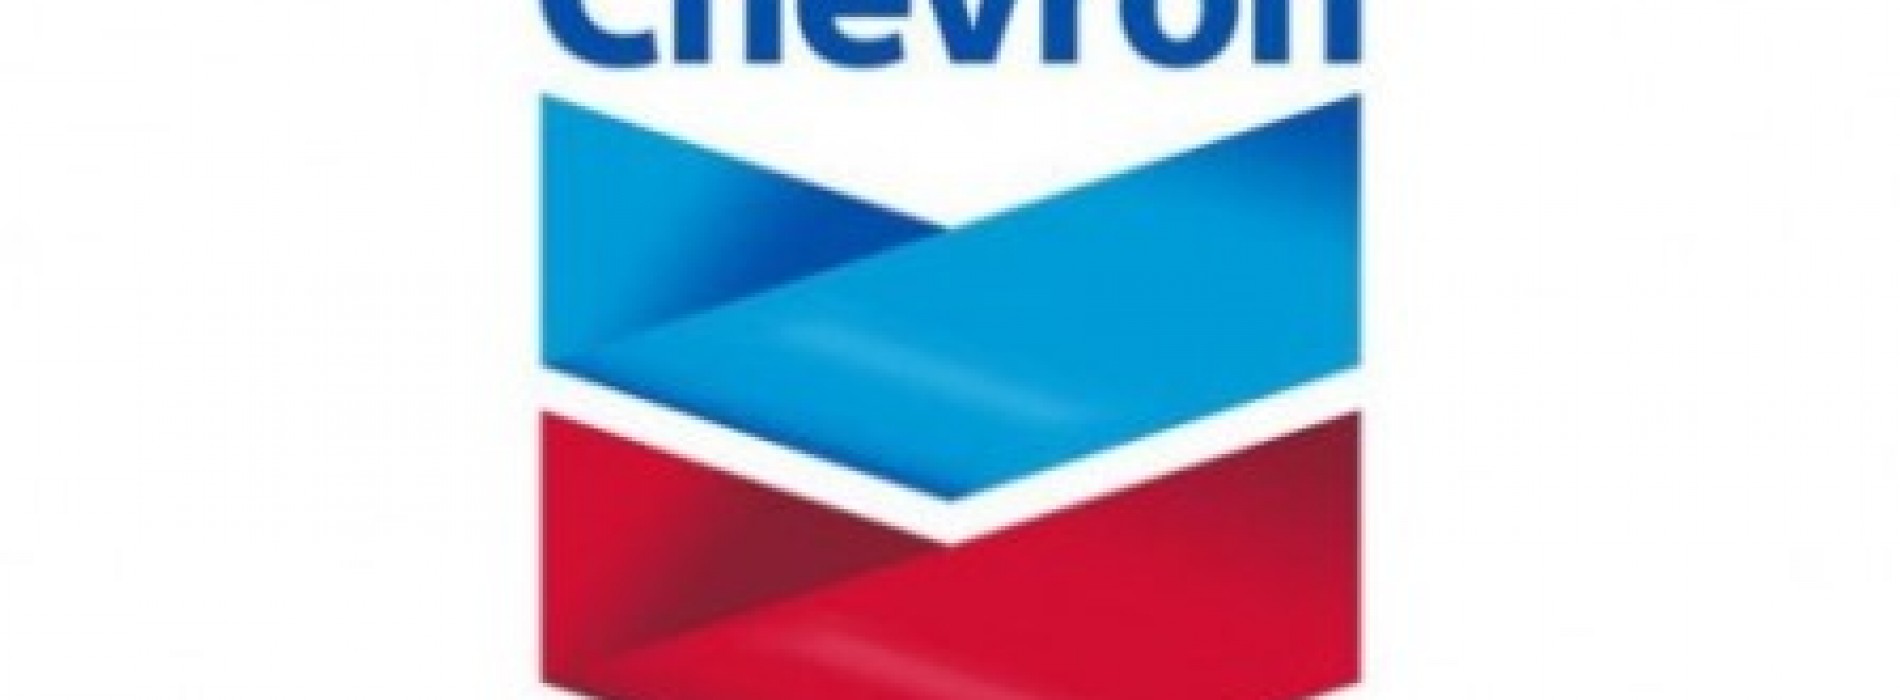 Chevron Nigeria launches $1.4m HIV Mother-To-Child prevention project in Bayelsa